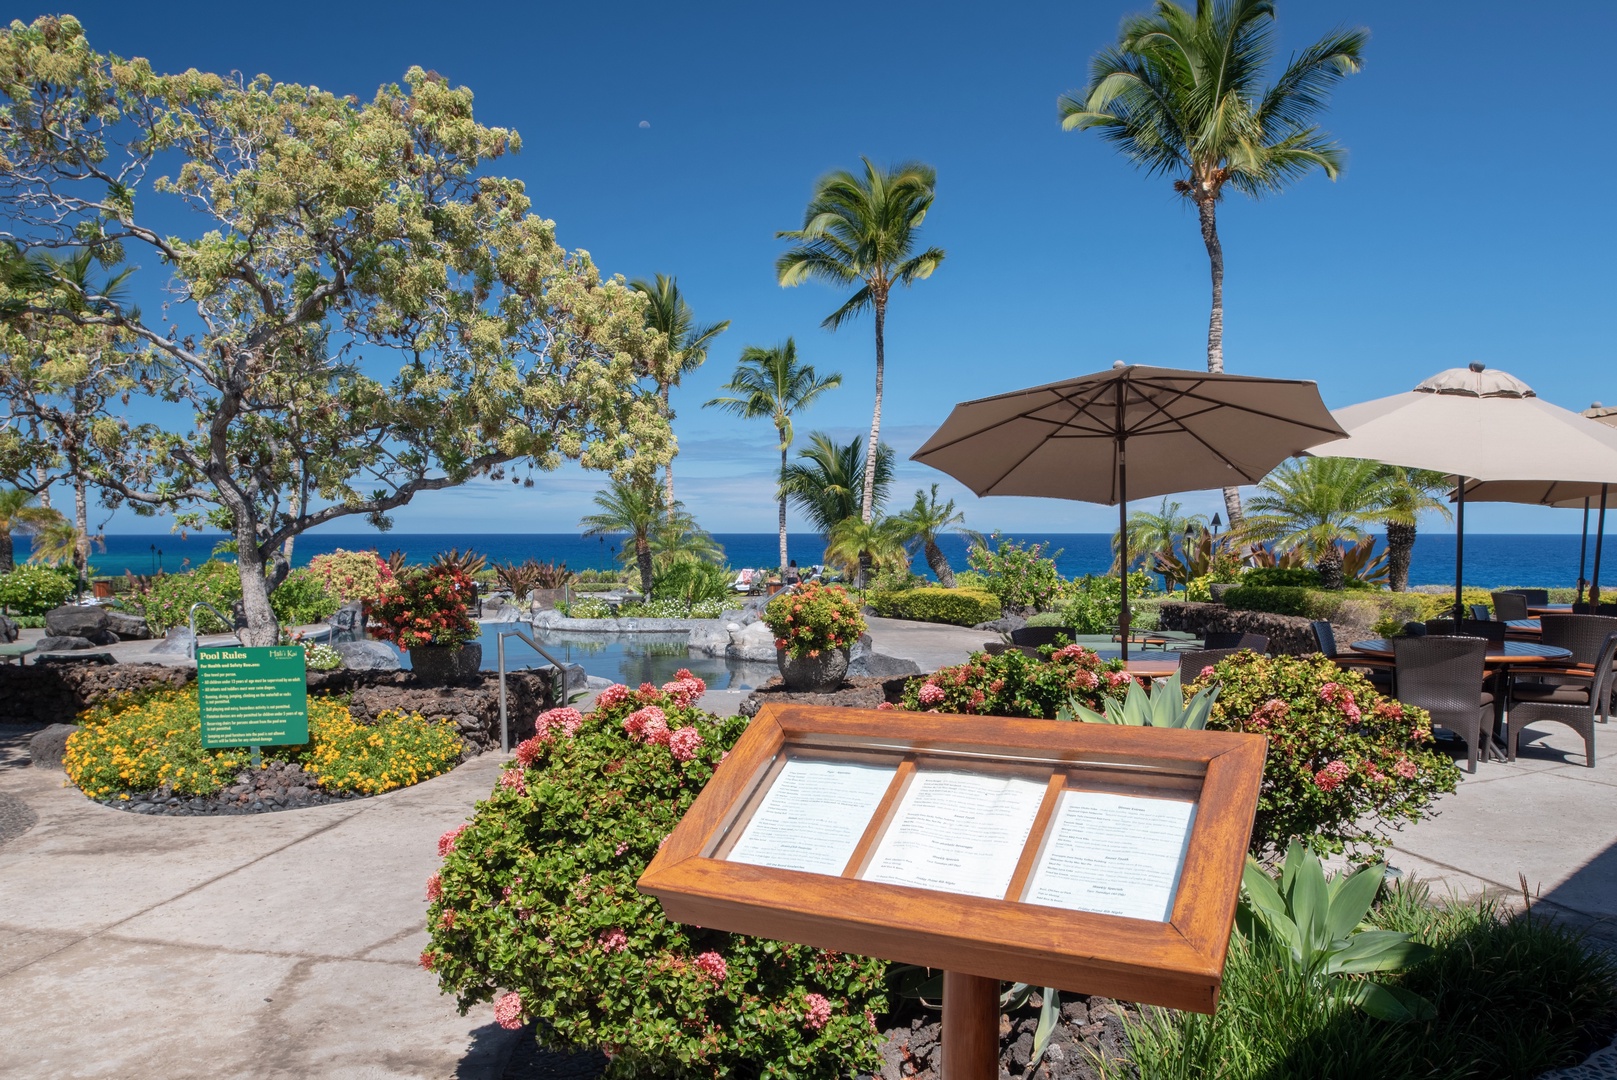 Waikoloa Vacation Rentals, 3BD Hali'i Kai (12G) at Waikoloa Resort - Attractive menu at the Hali'i Kai Ocean Club Bar & Grille, one of the only private restaurants on the island.